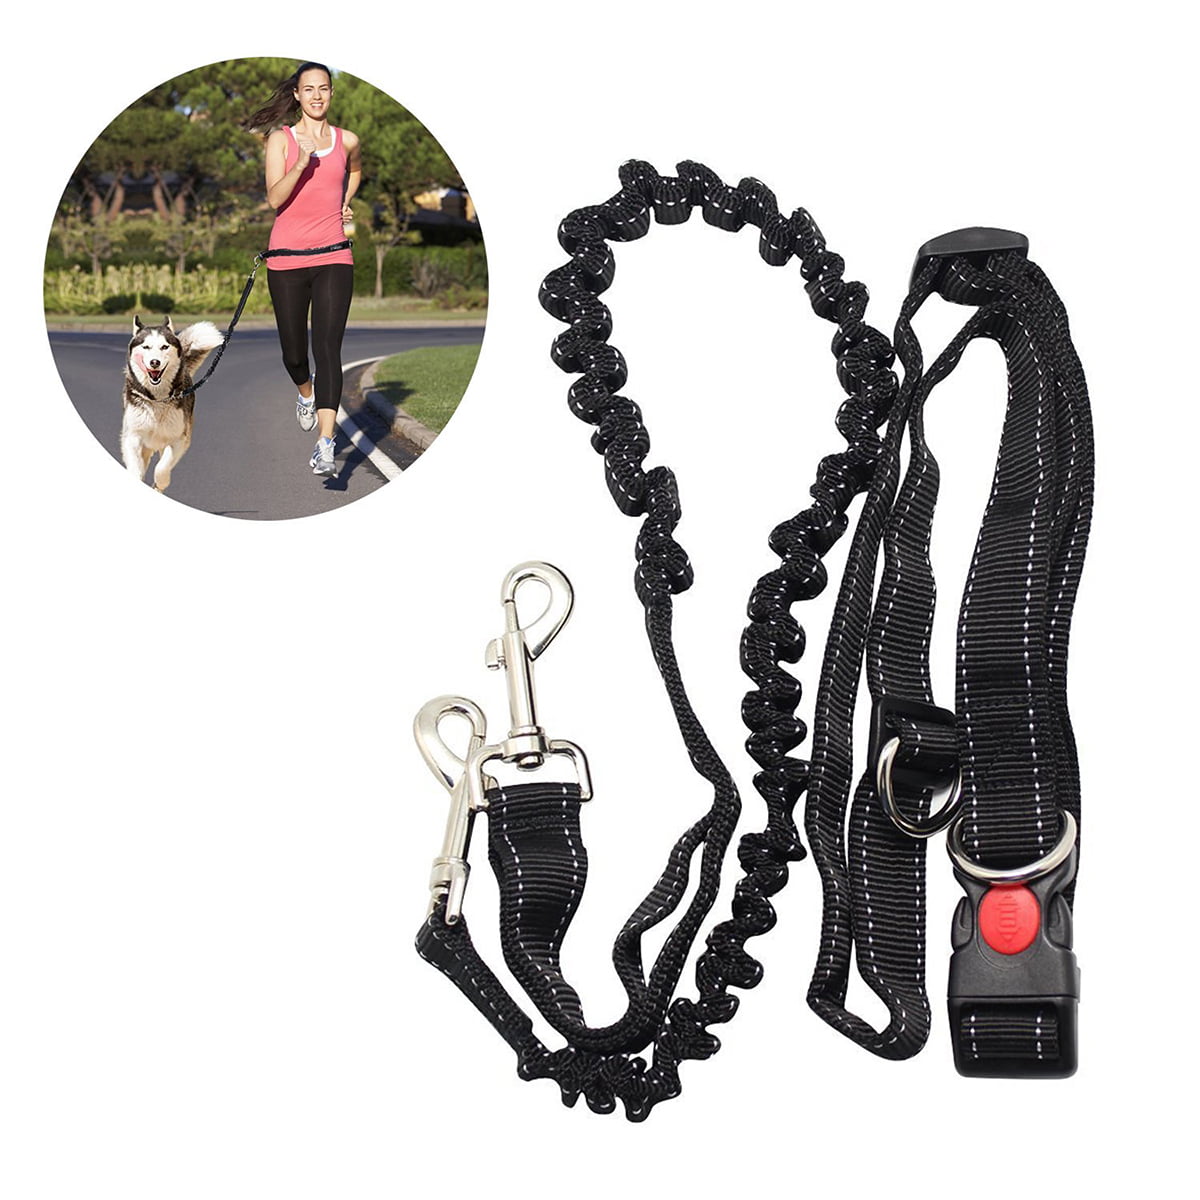 Adjustable Waist Belt Perfect for Jogging Hiking Walking iplusmile Hands Free Running Dog Lead Dog Lead Leash Bungee Harness for Running Pet